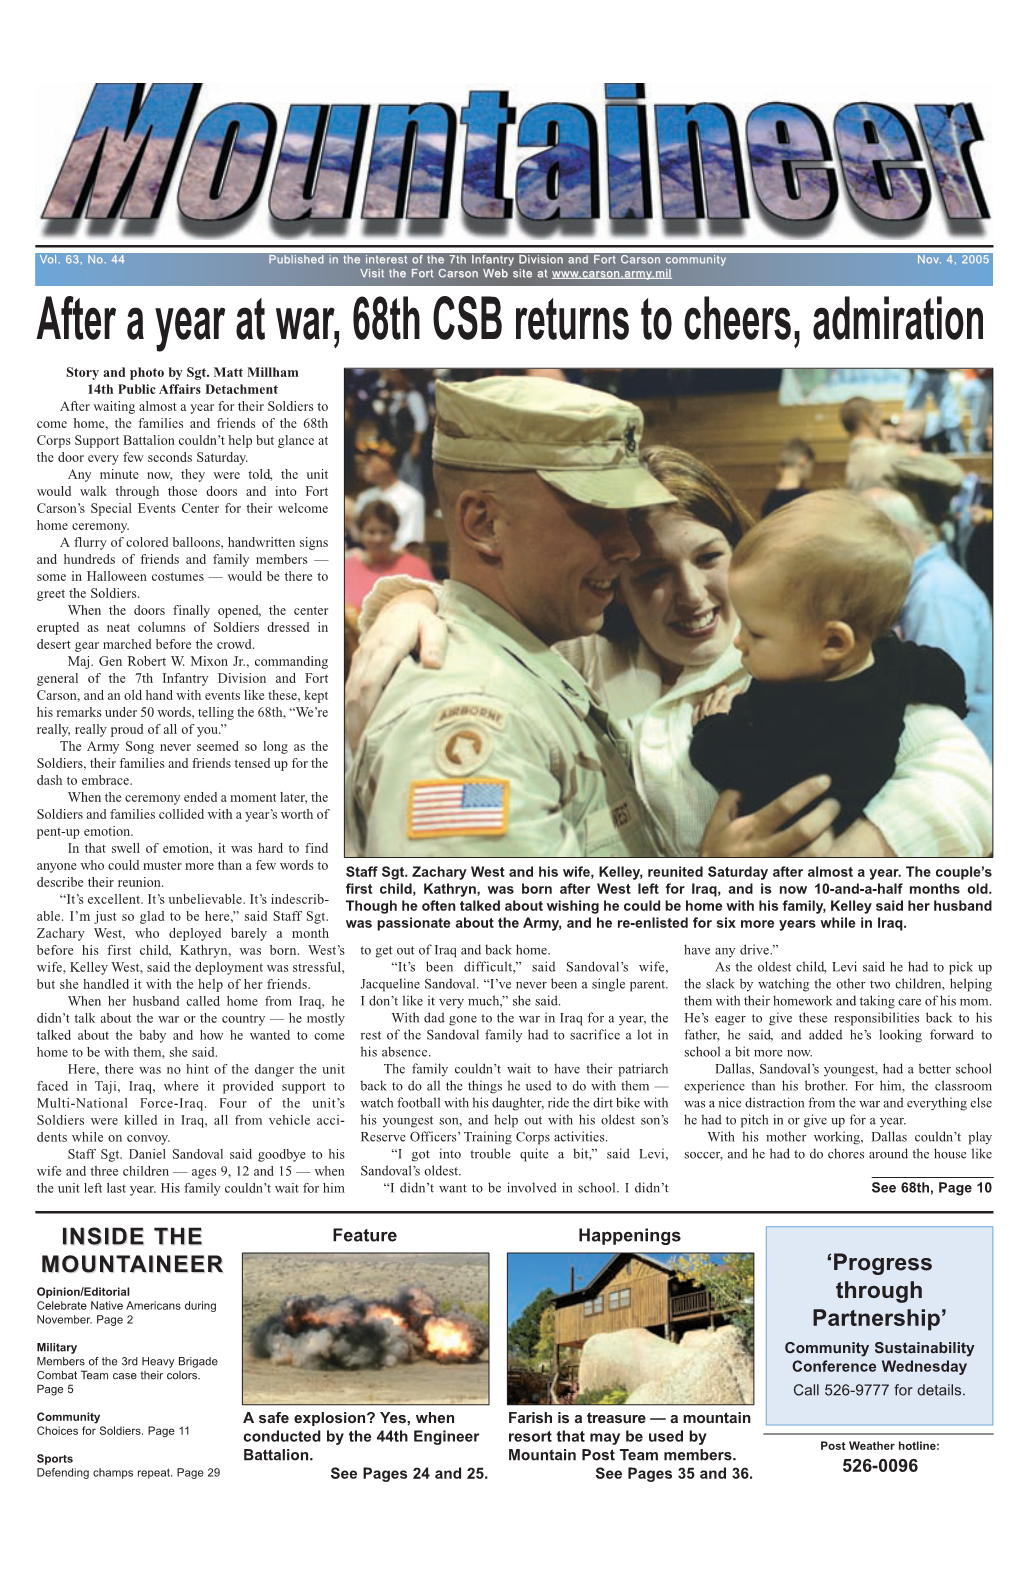 After a Year at War, 68Th CSB Returns to Cheers, Admiration Story and Photo by Sgt